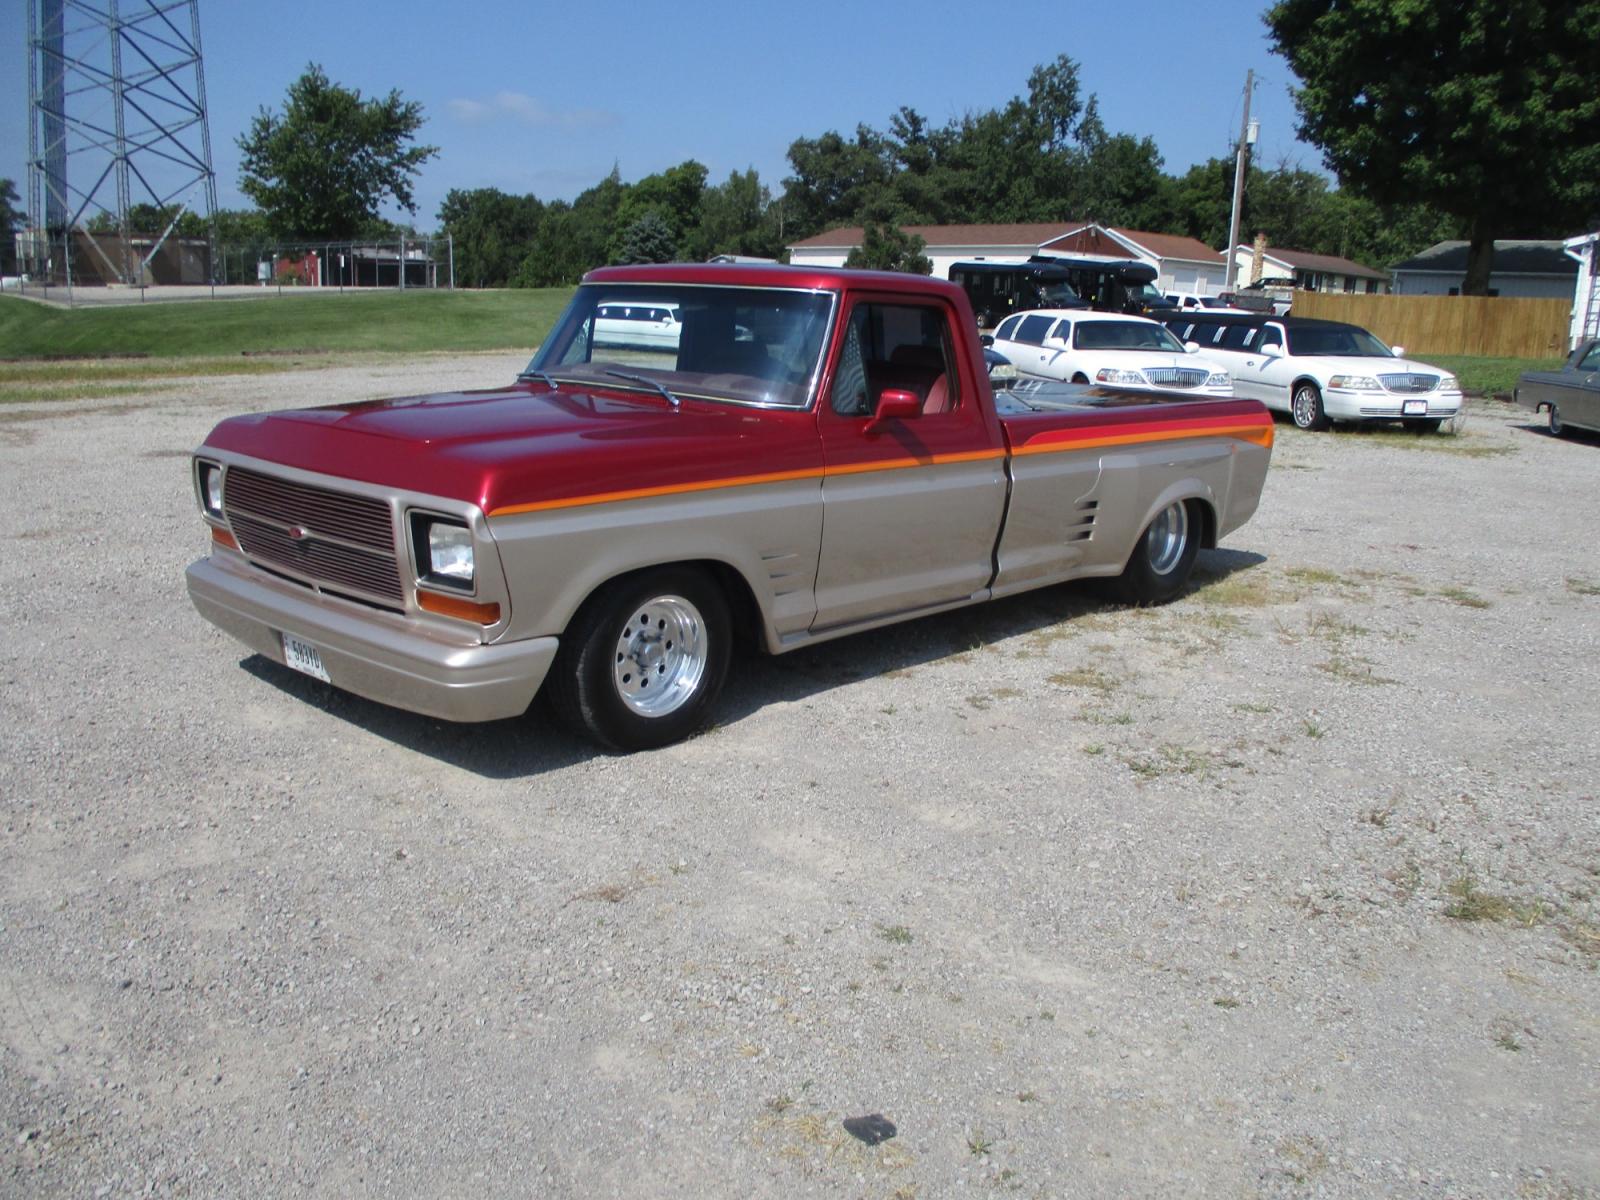 1977 /Burgundy Ford with an 351 engine, Automatic transmission, 0.000000, 0.000000 - 1977 Ford Engine: 351 Transmission: C-6 Trans. Rear End: Narrowed Ford Rear w/Tubbed Bed Interior: Hand Built Custom Interior w/Digital Dash Highlights: Ground effects, Fender Vents, Billet Grille, “92 Ford Bumper. Etched Glass, Digital Dash., Tilt Wheel, Center Cut Hood. Polished Stainless - Photo #0